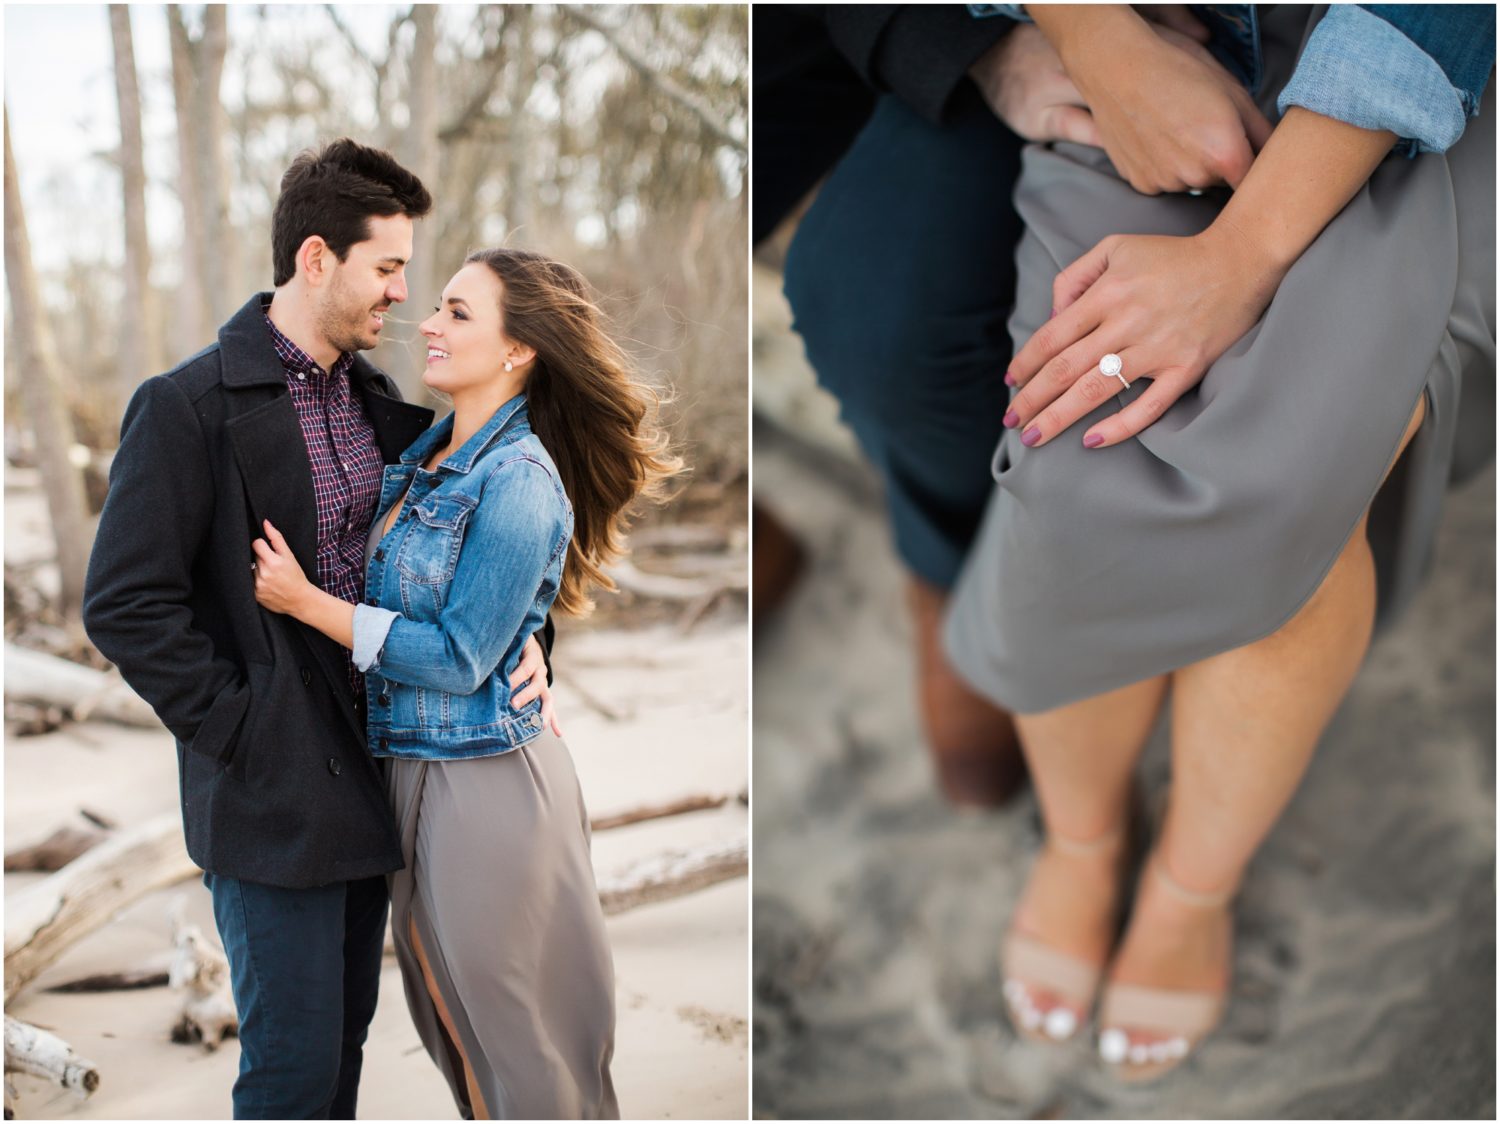 Amelia Island Wedding Photographers, Brooke Images, Beach Session, Engagement Session, Jen and Grant's Engagement Session